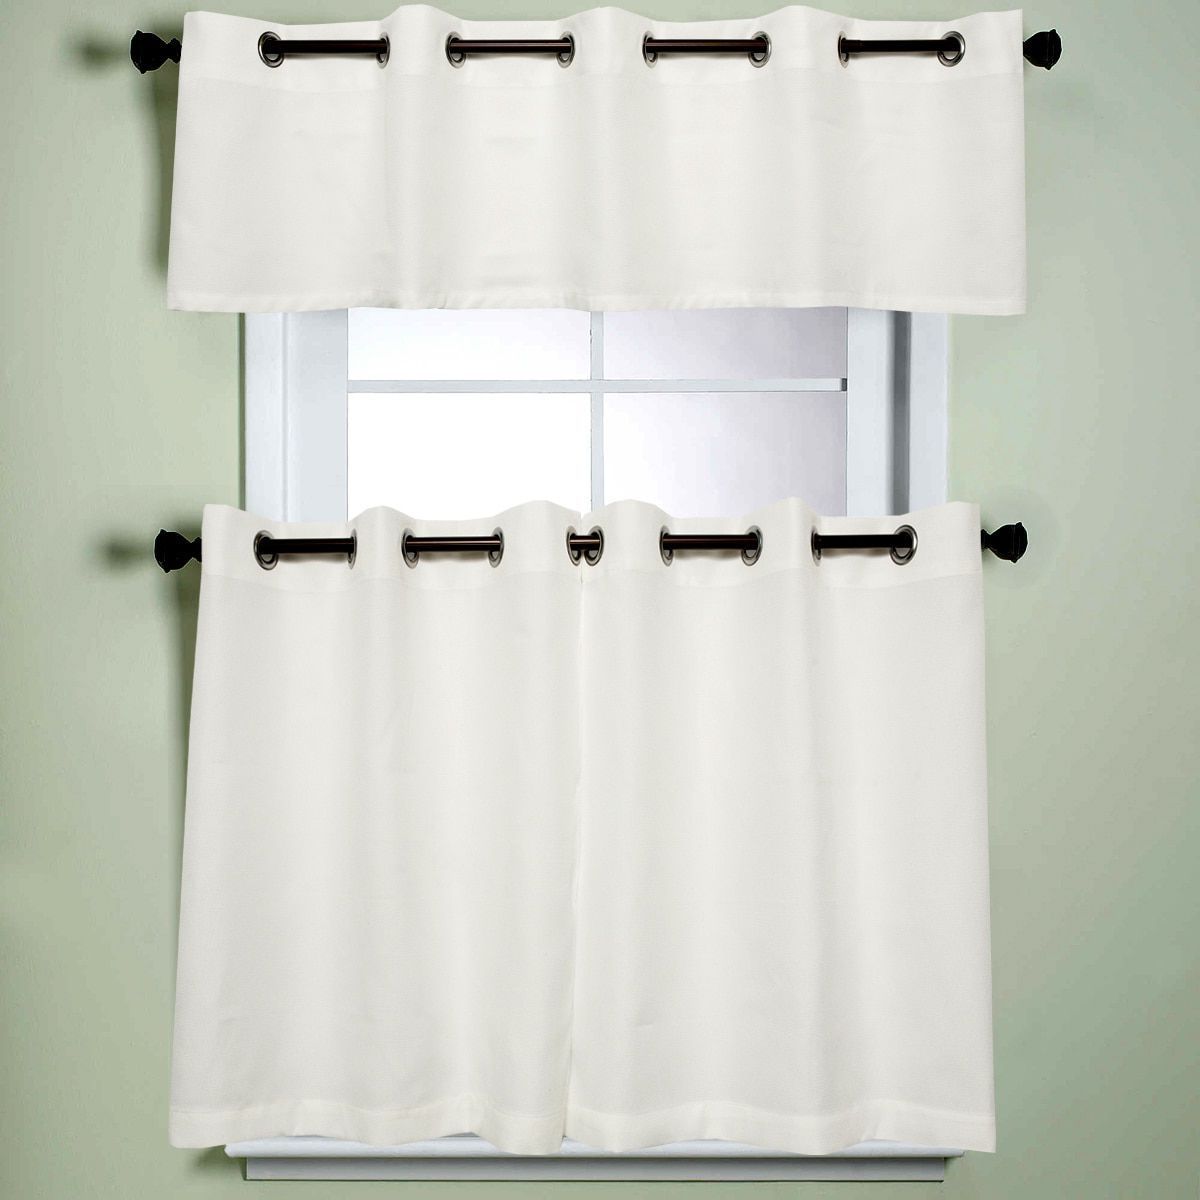 Modern Subtle Texture Solid White Kitchen Curtain Parts With Intended For Current Modern Subtle Texture Solid White Kitchen Curtain Parts With Grommets Tier And Valance Options (View 2 of 20)